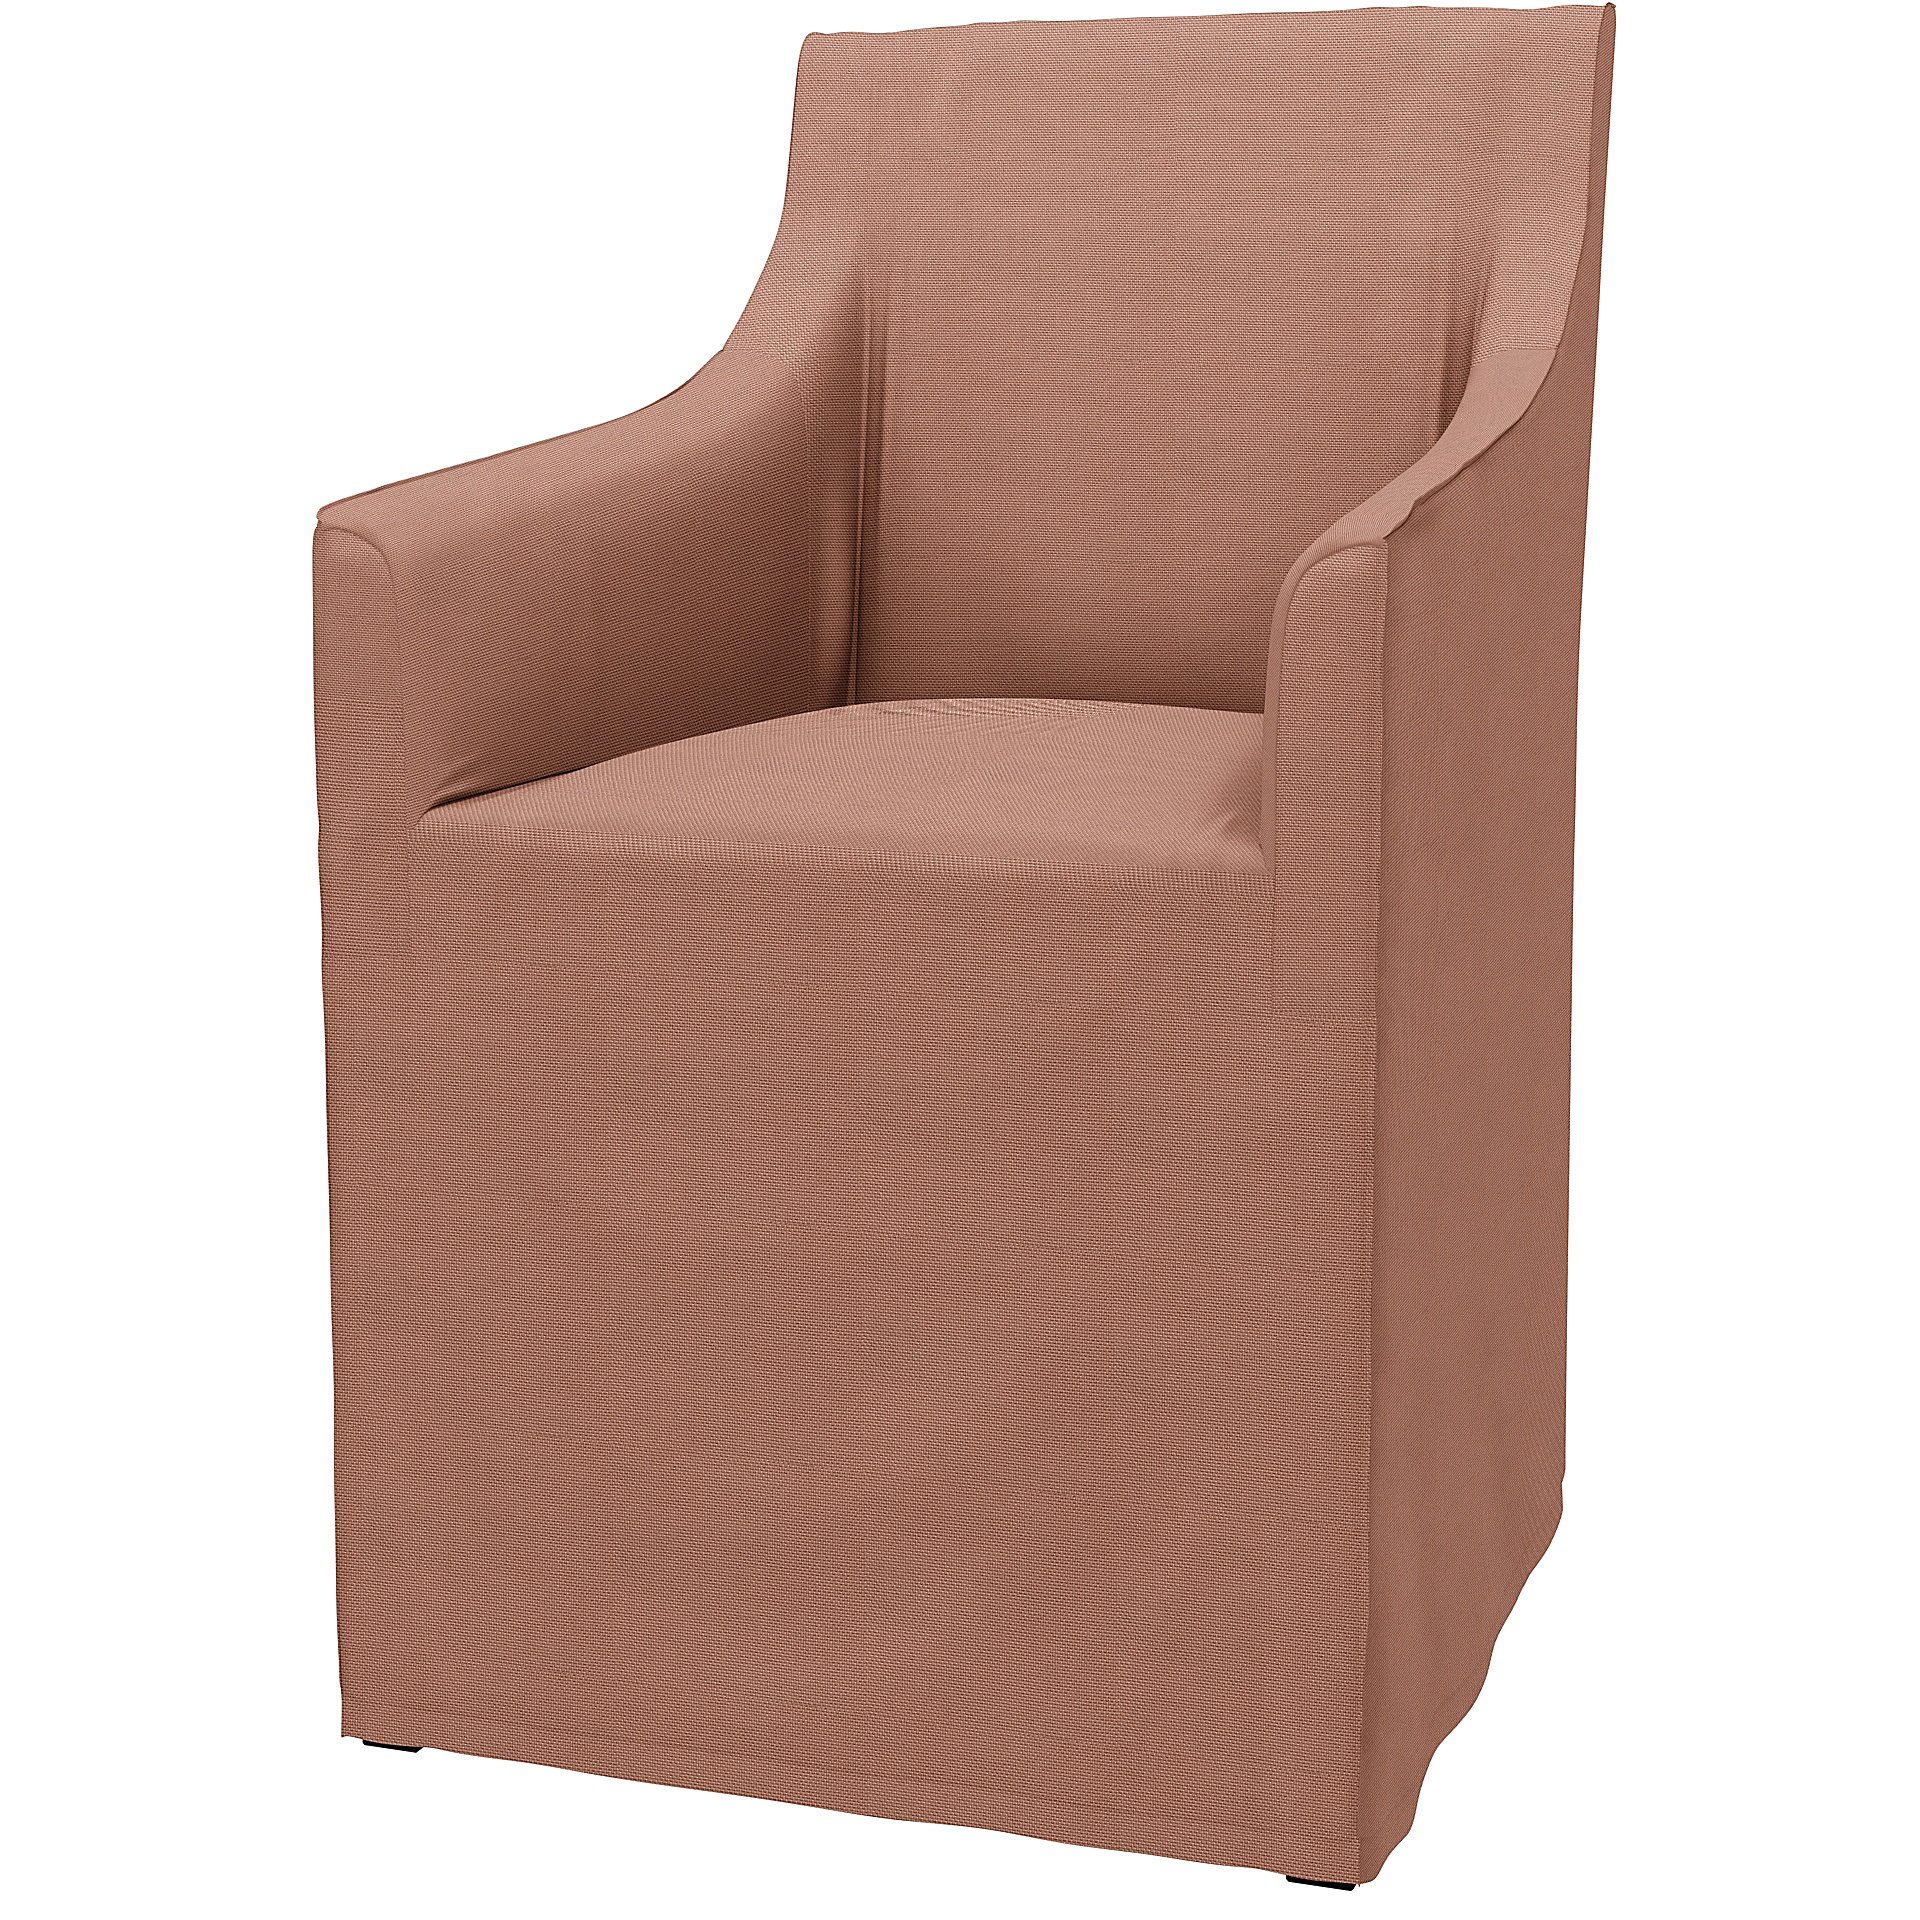 IKEA - Sakarias Chair with Armrests Cover, Dusty Pink, Outdoor - Bemz